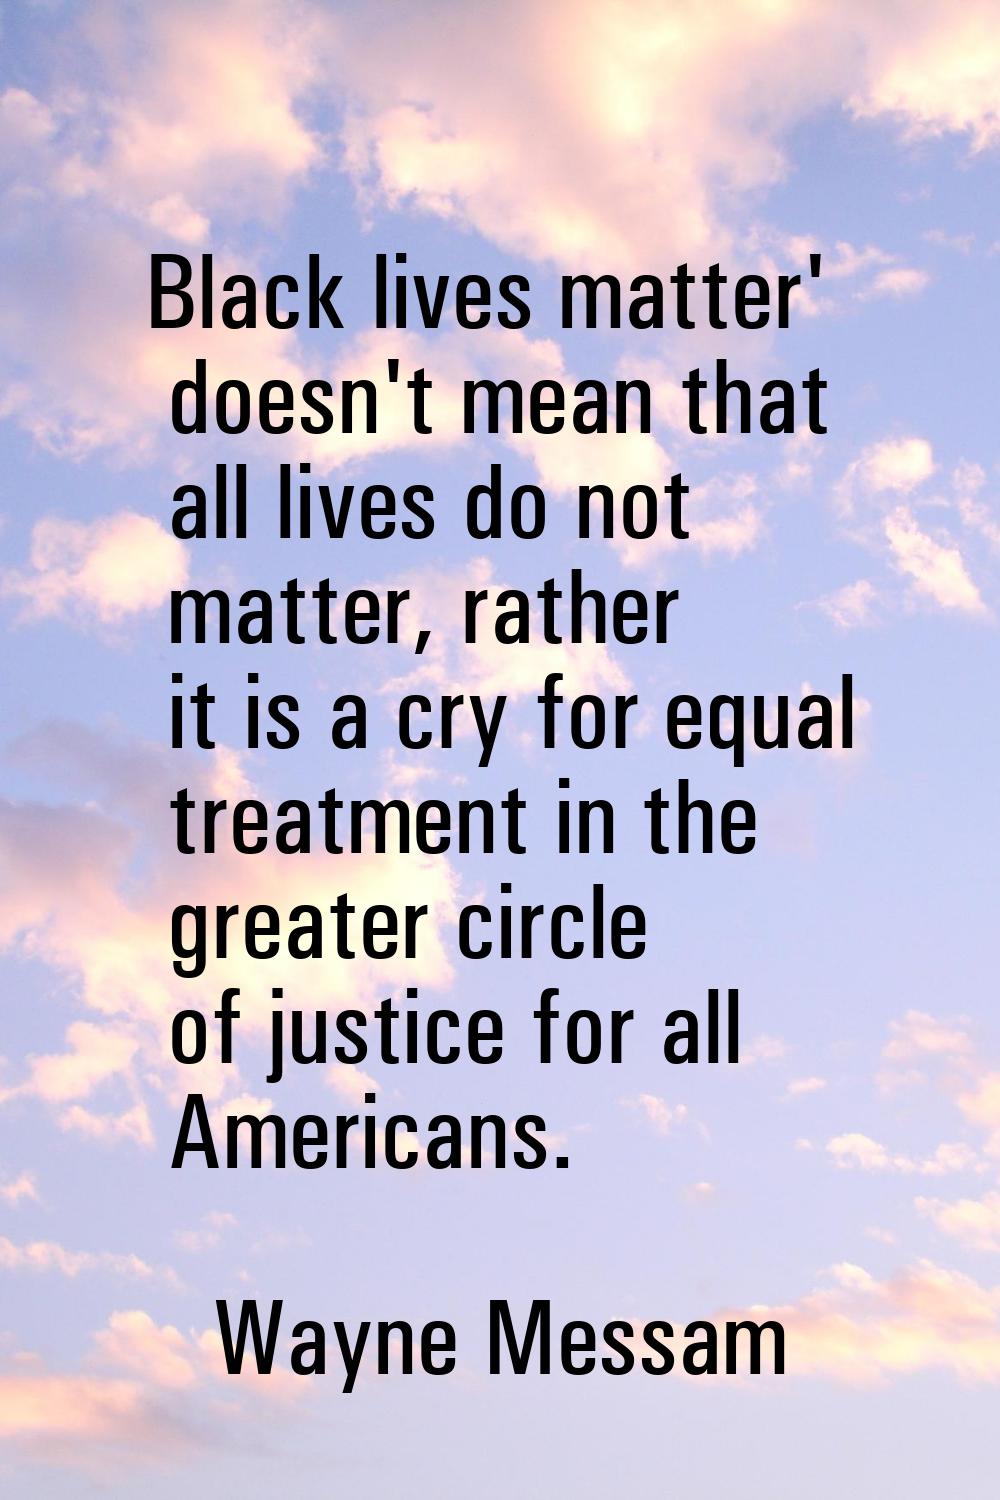 Black lives matter' doesn't mean that all lives do not matter, rather it is a cry for equal treatme